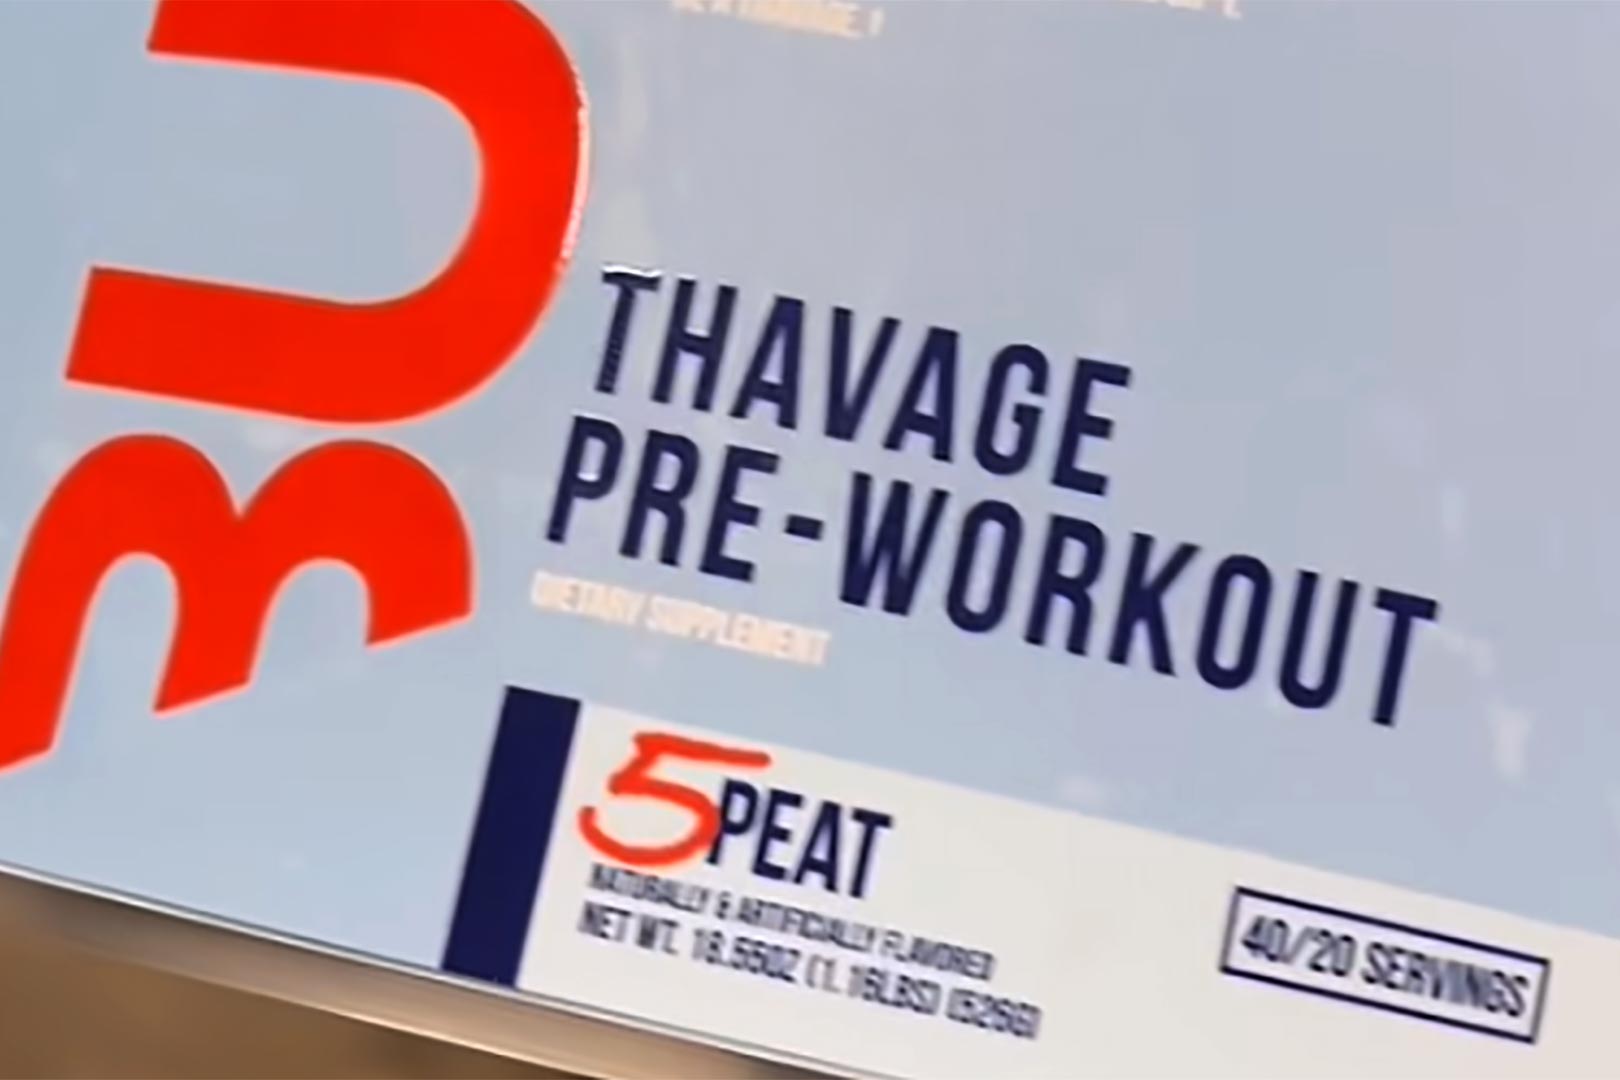 Raw Nutrition 5 Peat Thavage Flavor